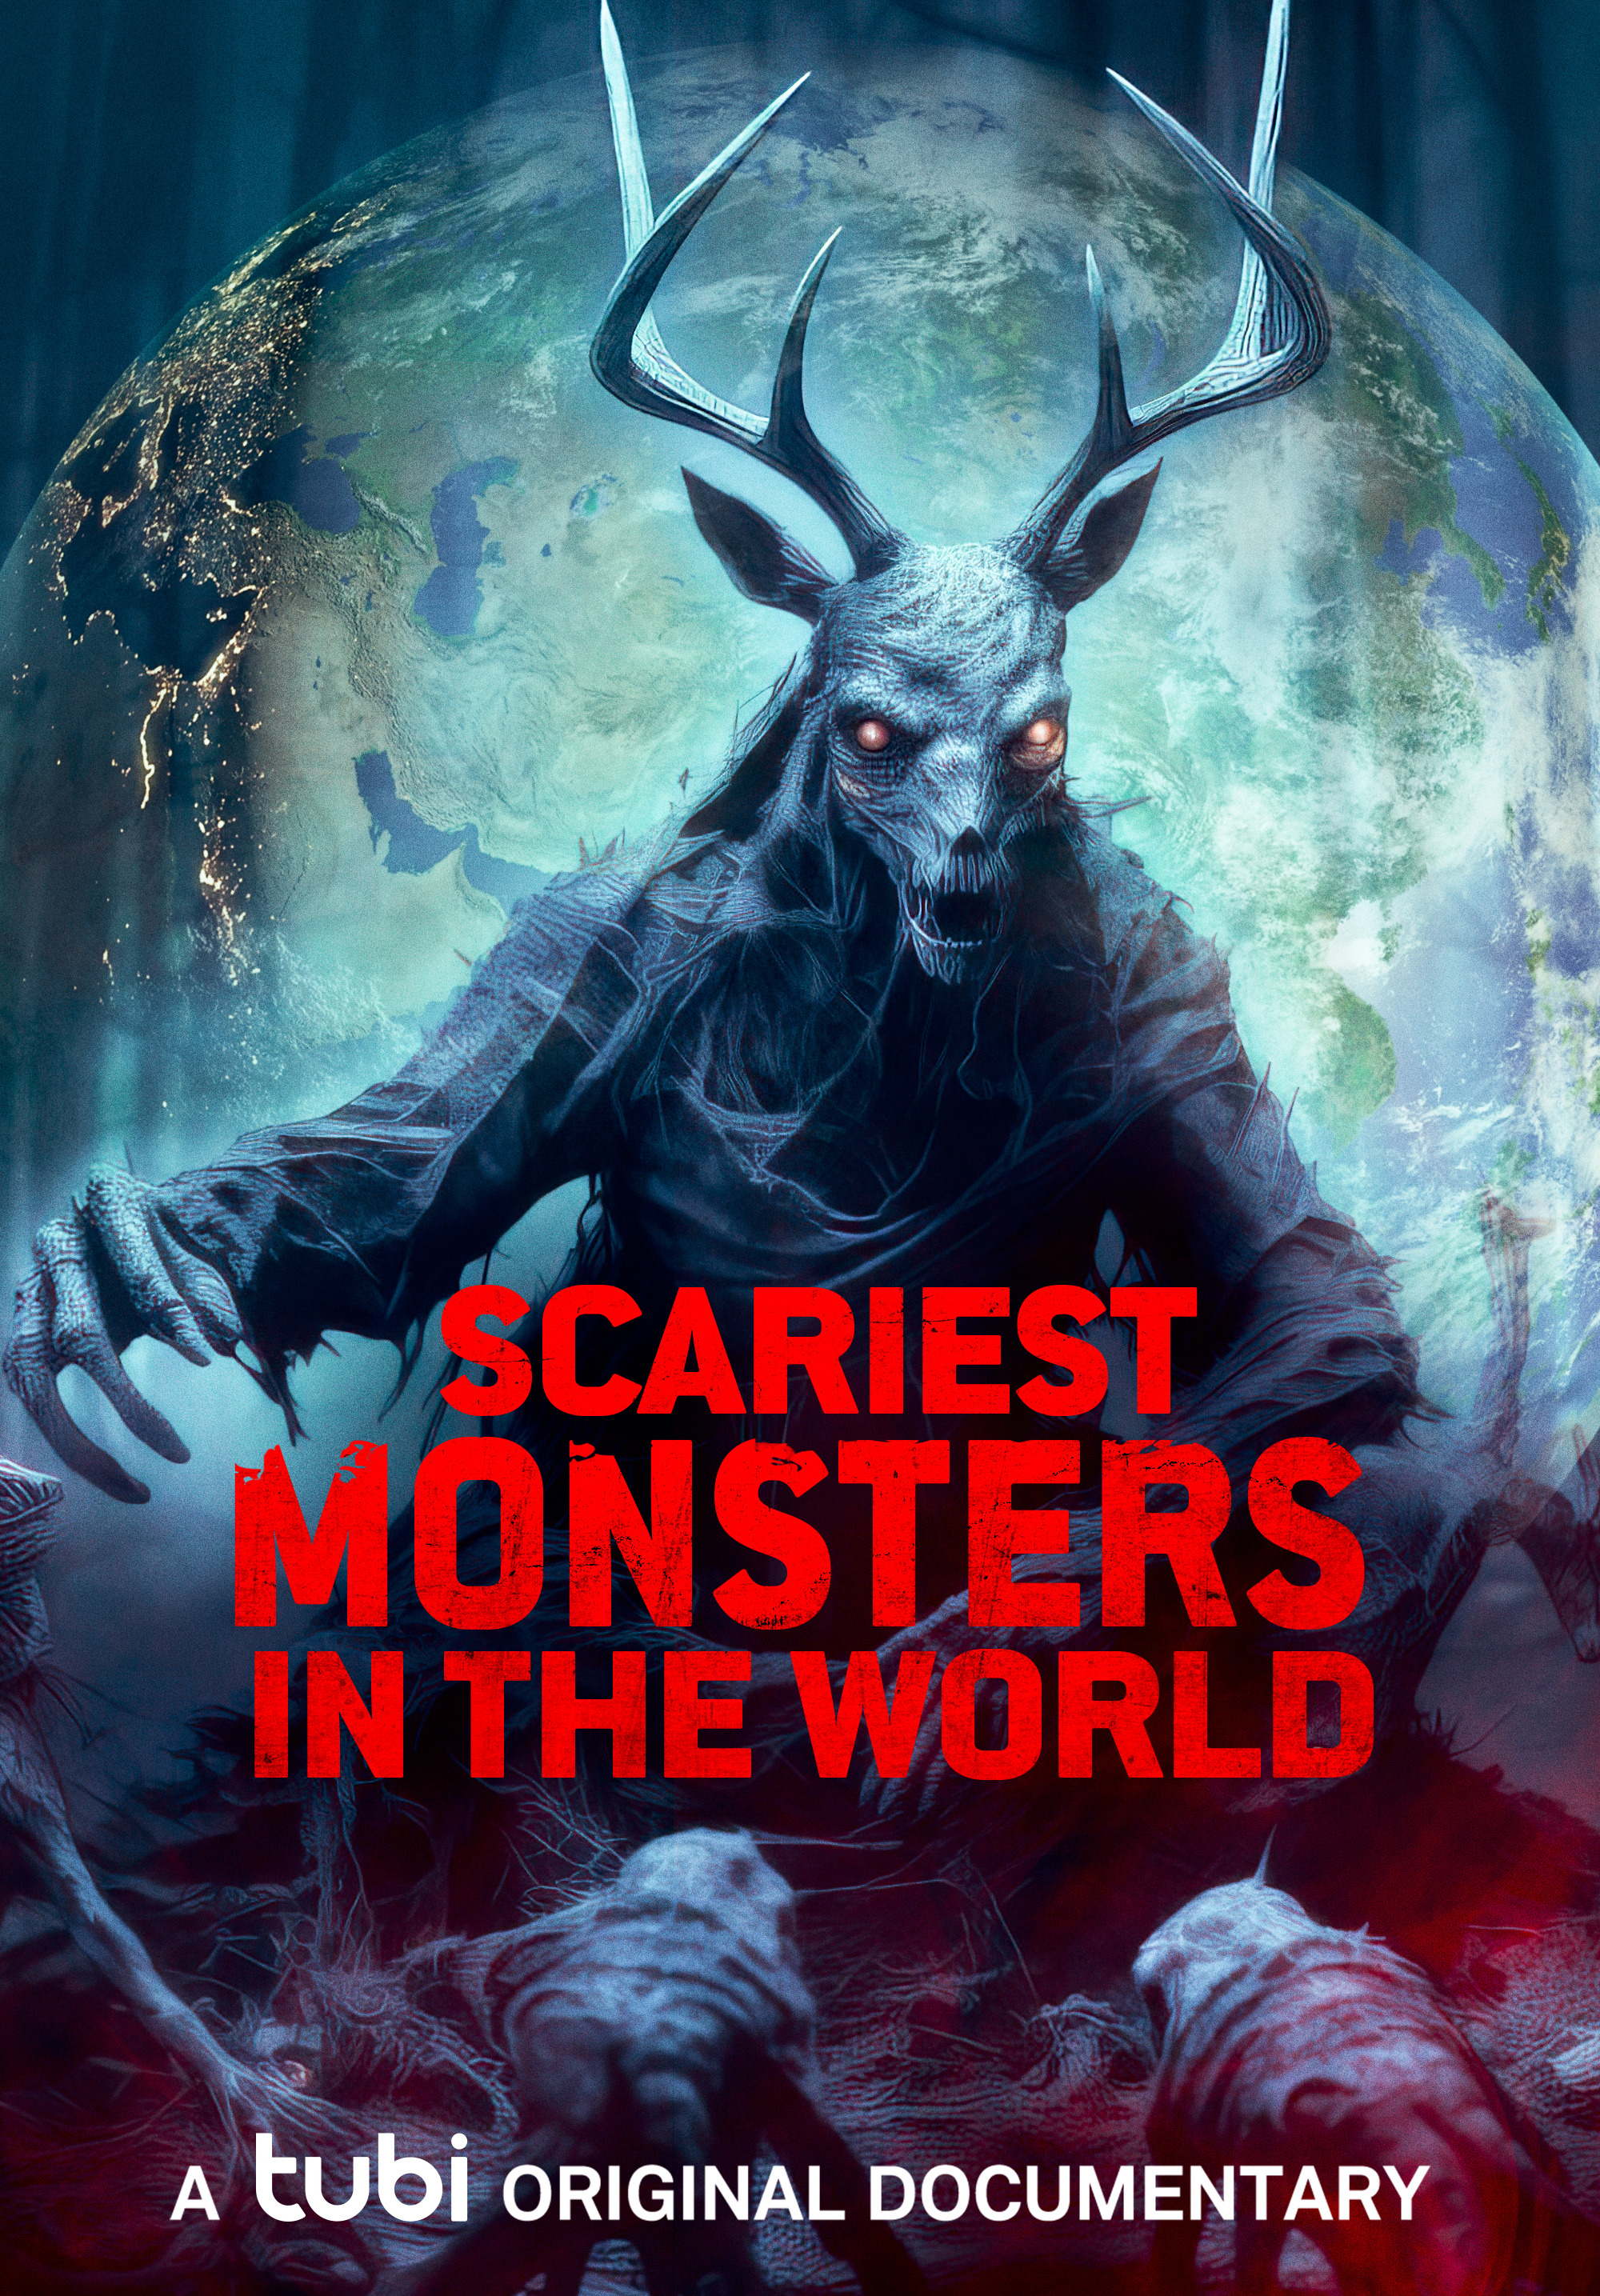 Mega Sized Movie Poster Image for Scariest Monsters in the World 